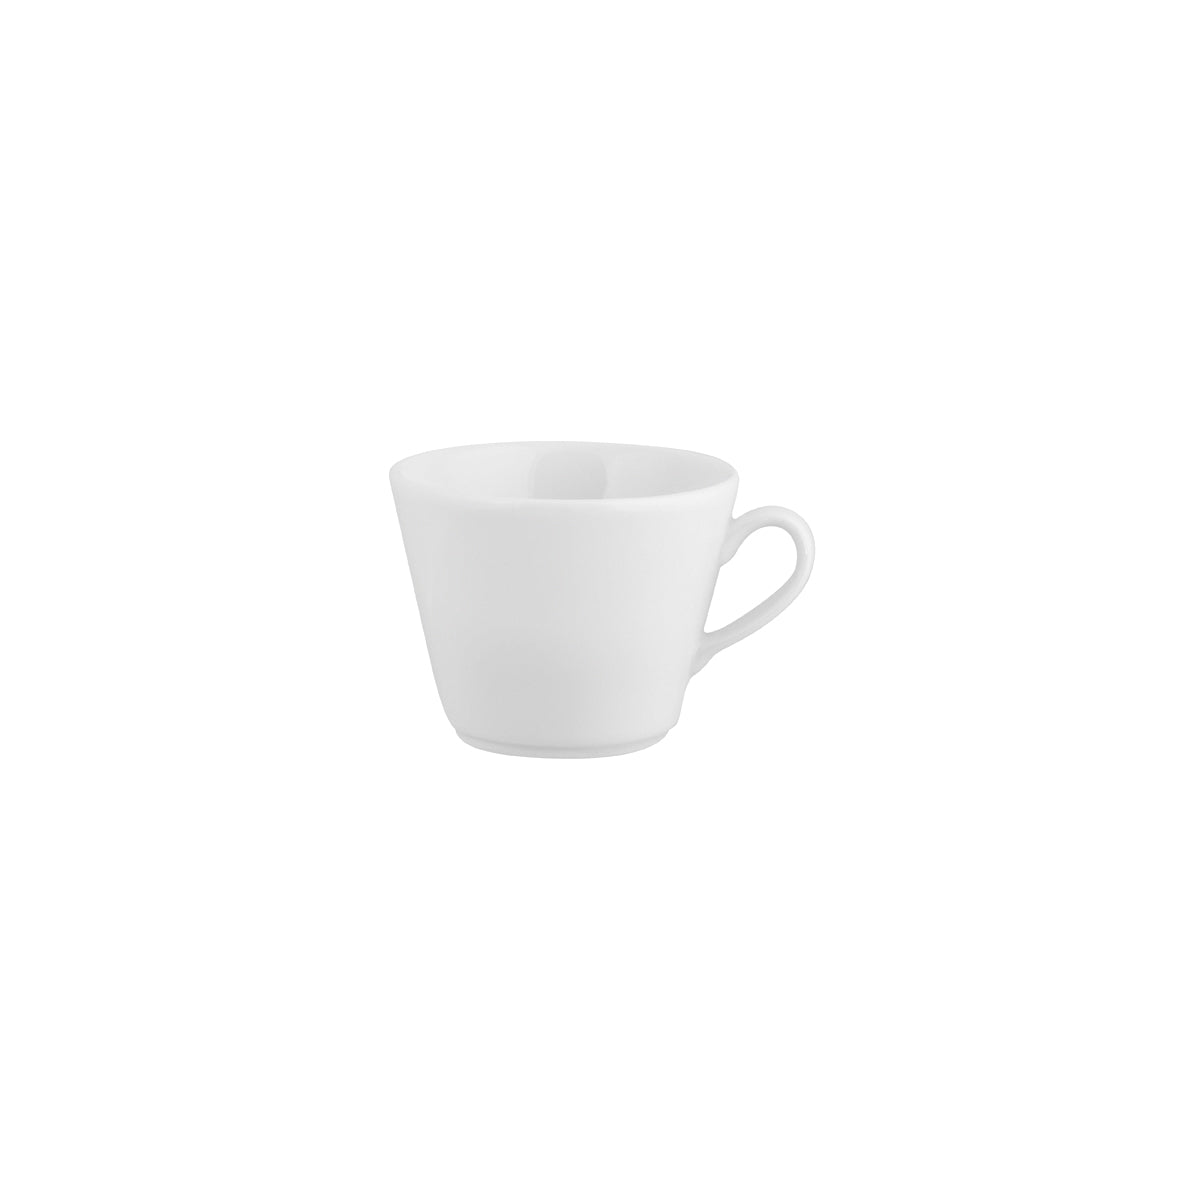 CONTEMPORARY CAPPUCCINO CUP OPEN HANDLE - 200ml, Flinders Collection